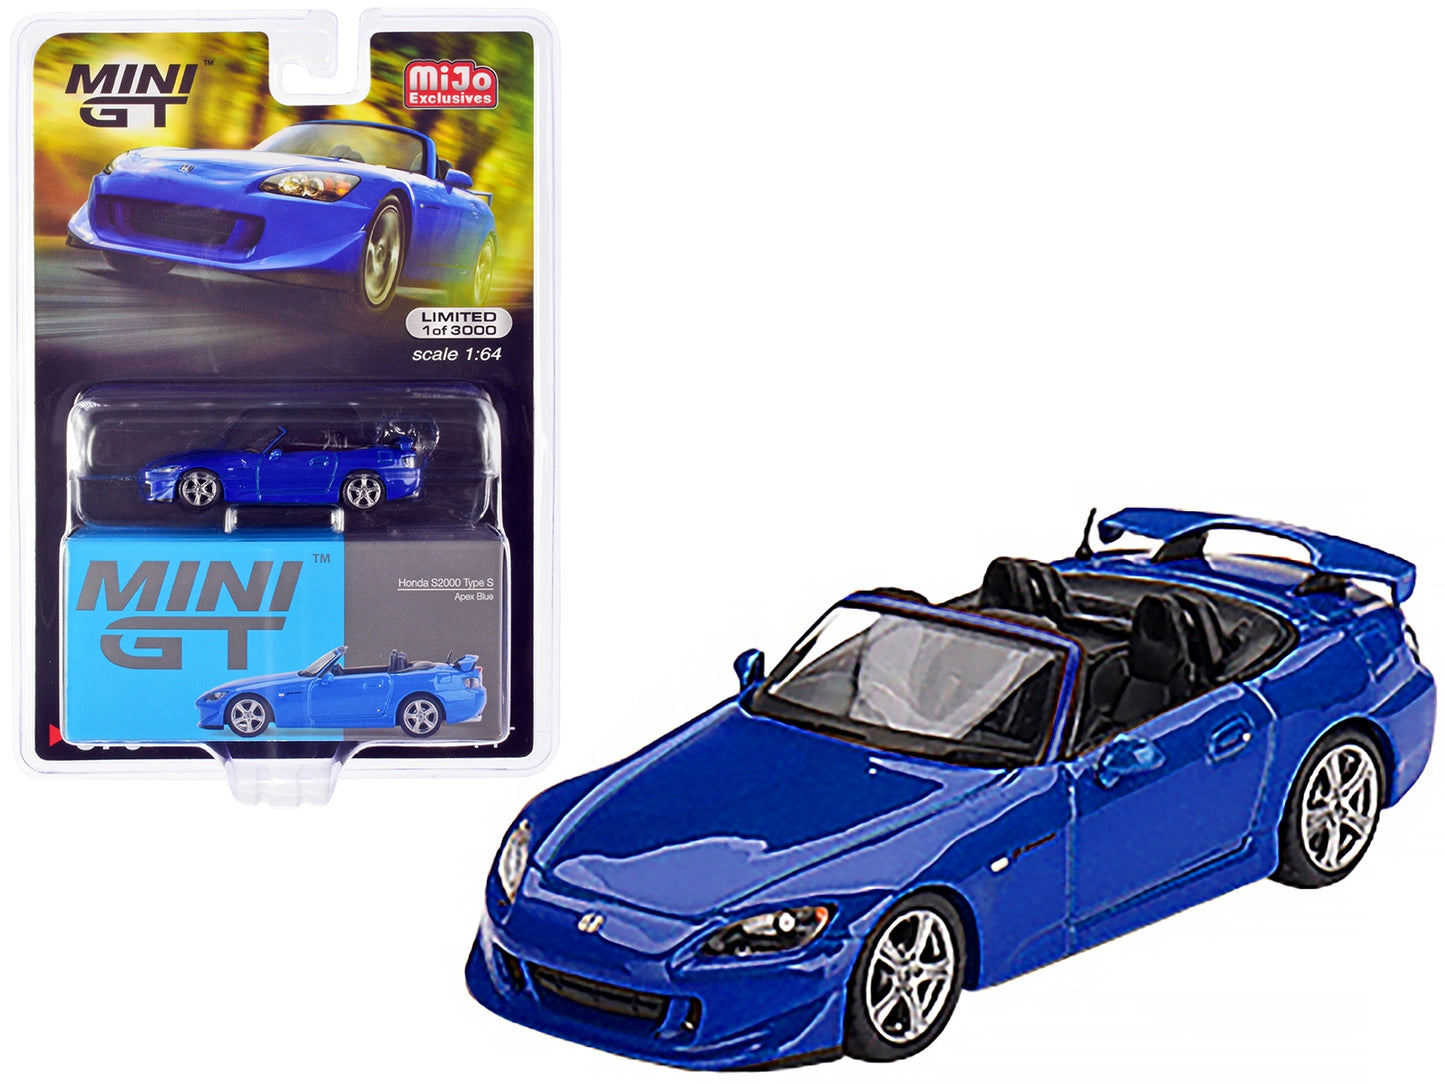 Honda S2000 (AP2) Type S Convertible RHD (Right Hand Drive) Apex Blue Limited Edition to 3000 pieces Worldwide 1/64 Diecast Model Car by True Scale Miniatures